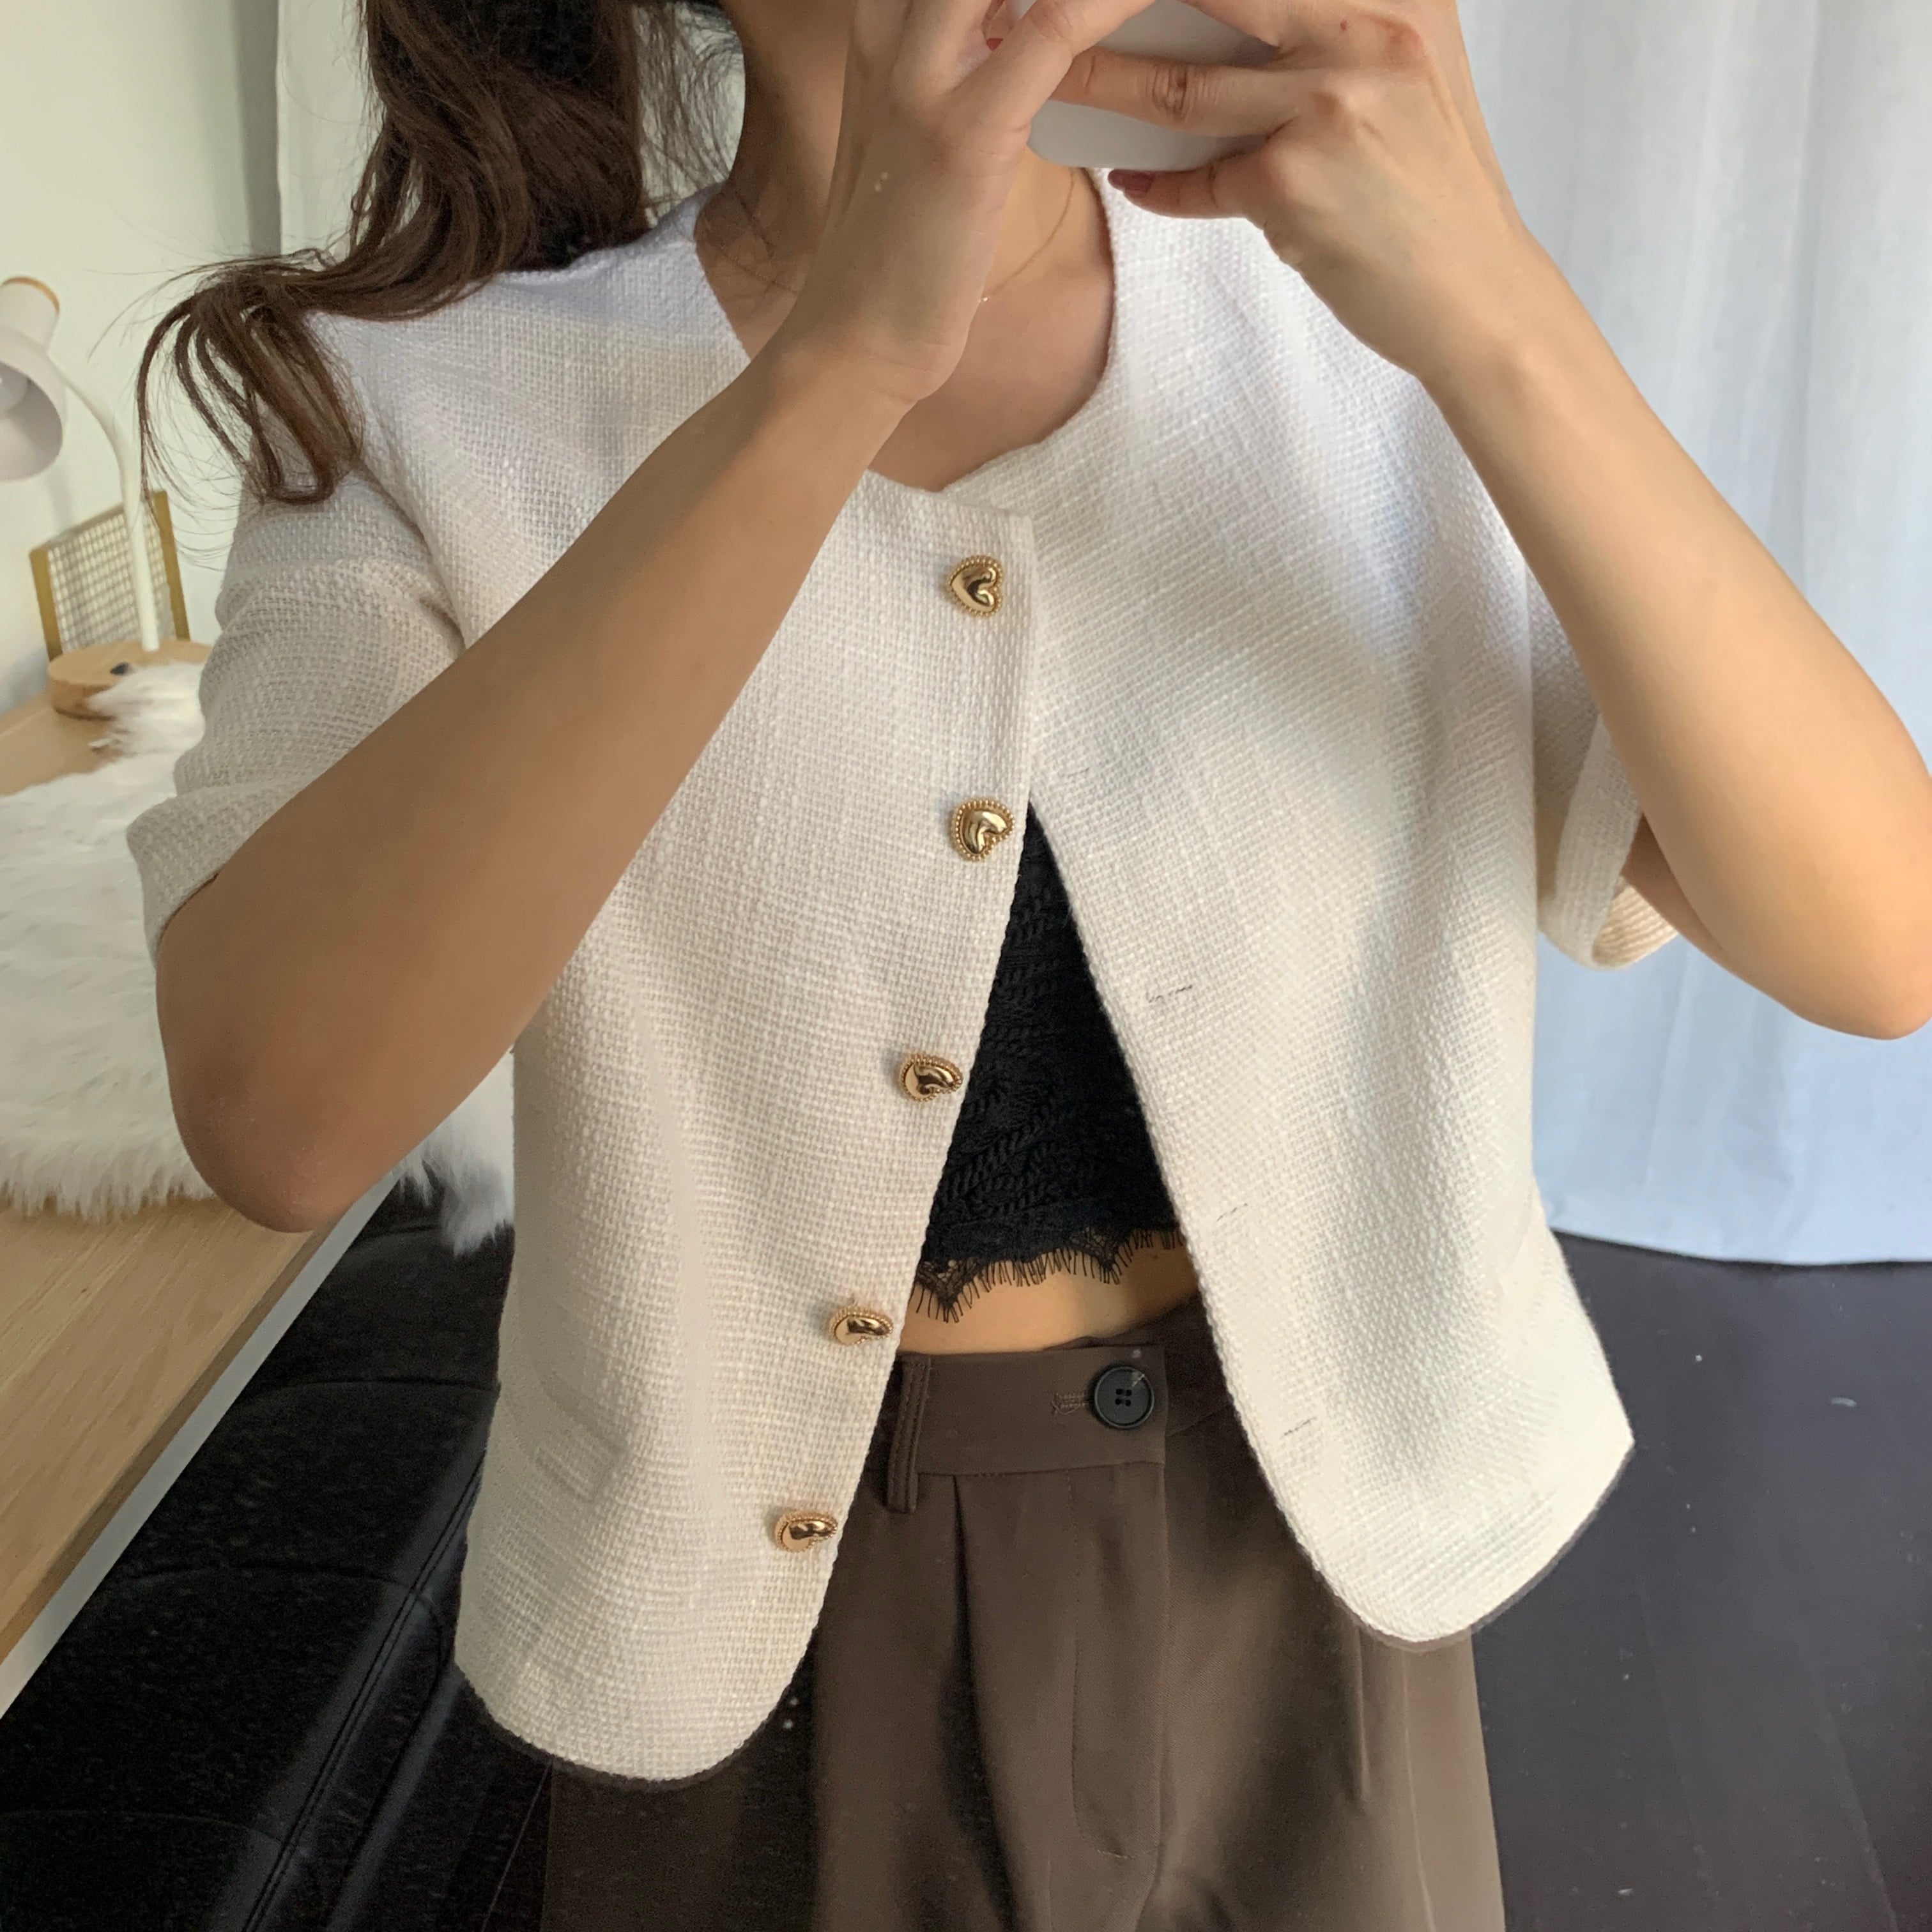 [Korean Style] Light Weight Collarless Cropped Jacket w/ Heart Shape Buttons